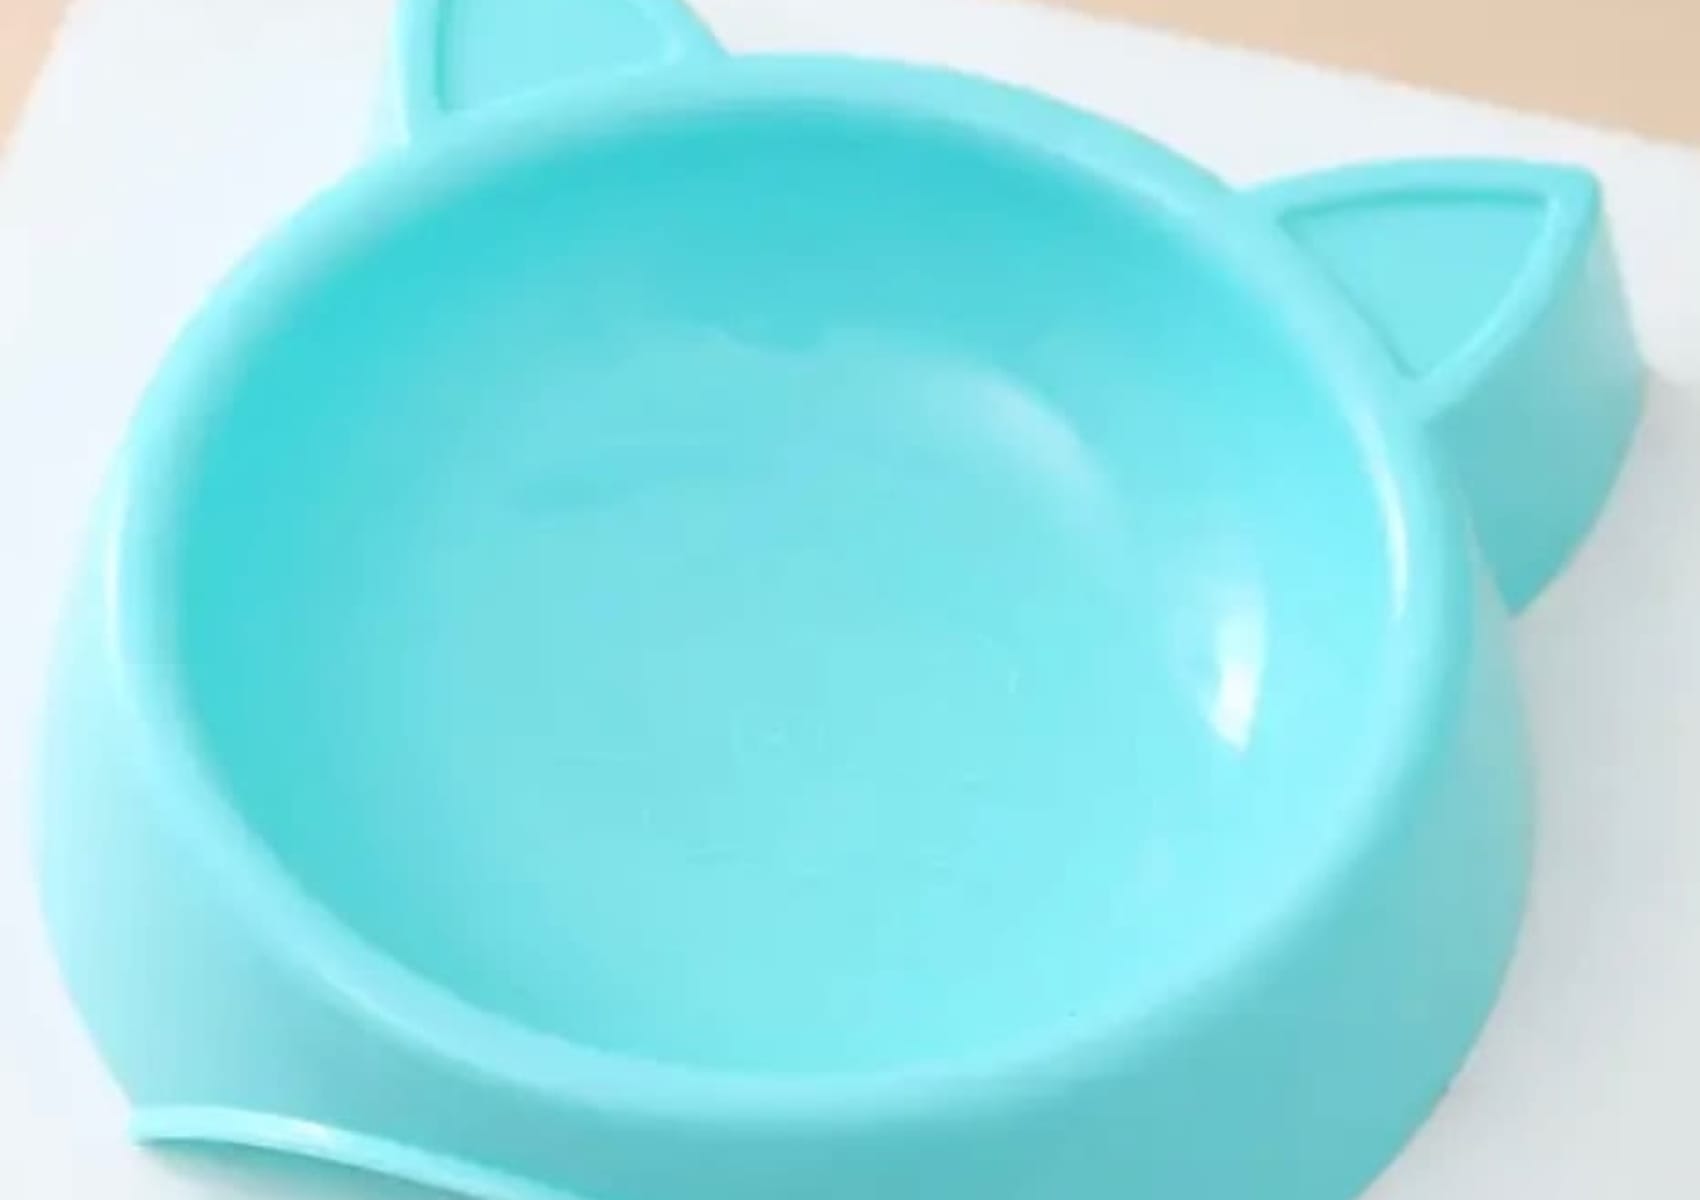 Blue cat shaped food or water bowl with cat face